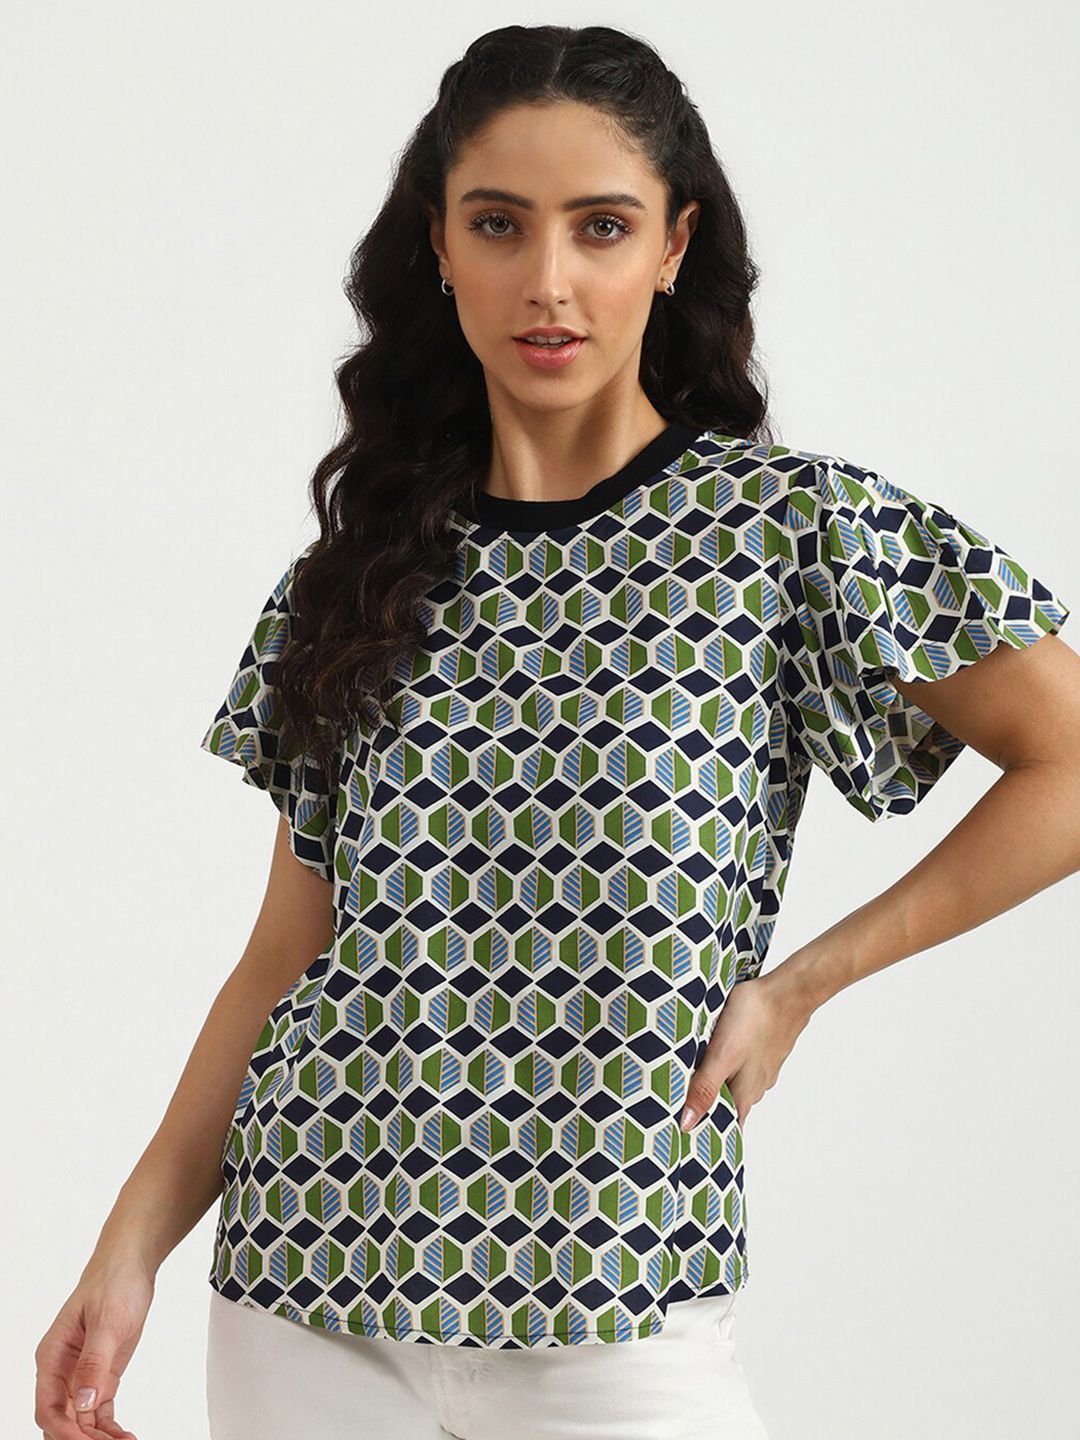 United Colors of Benetton Green & Black Geometric Printed Top Price in India